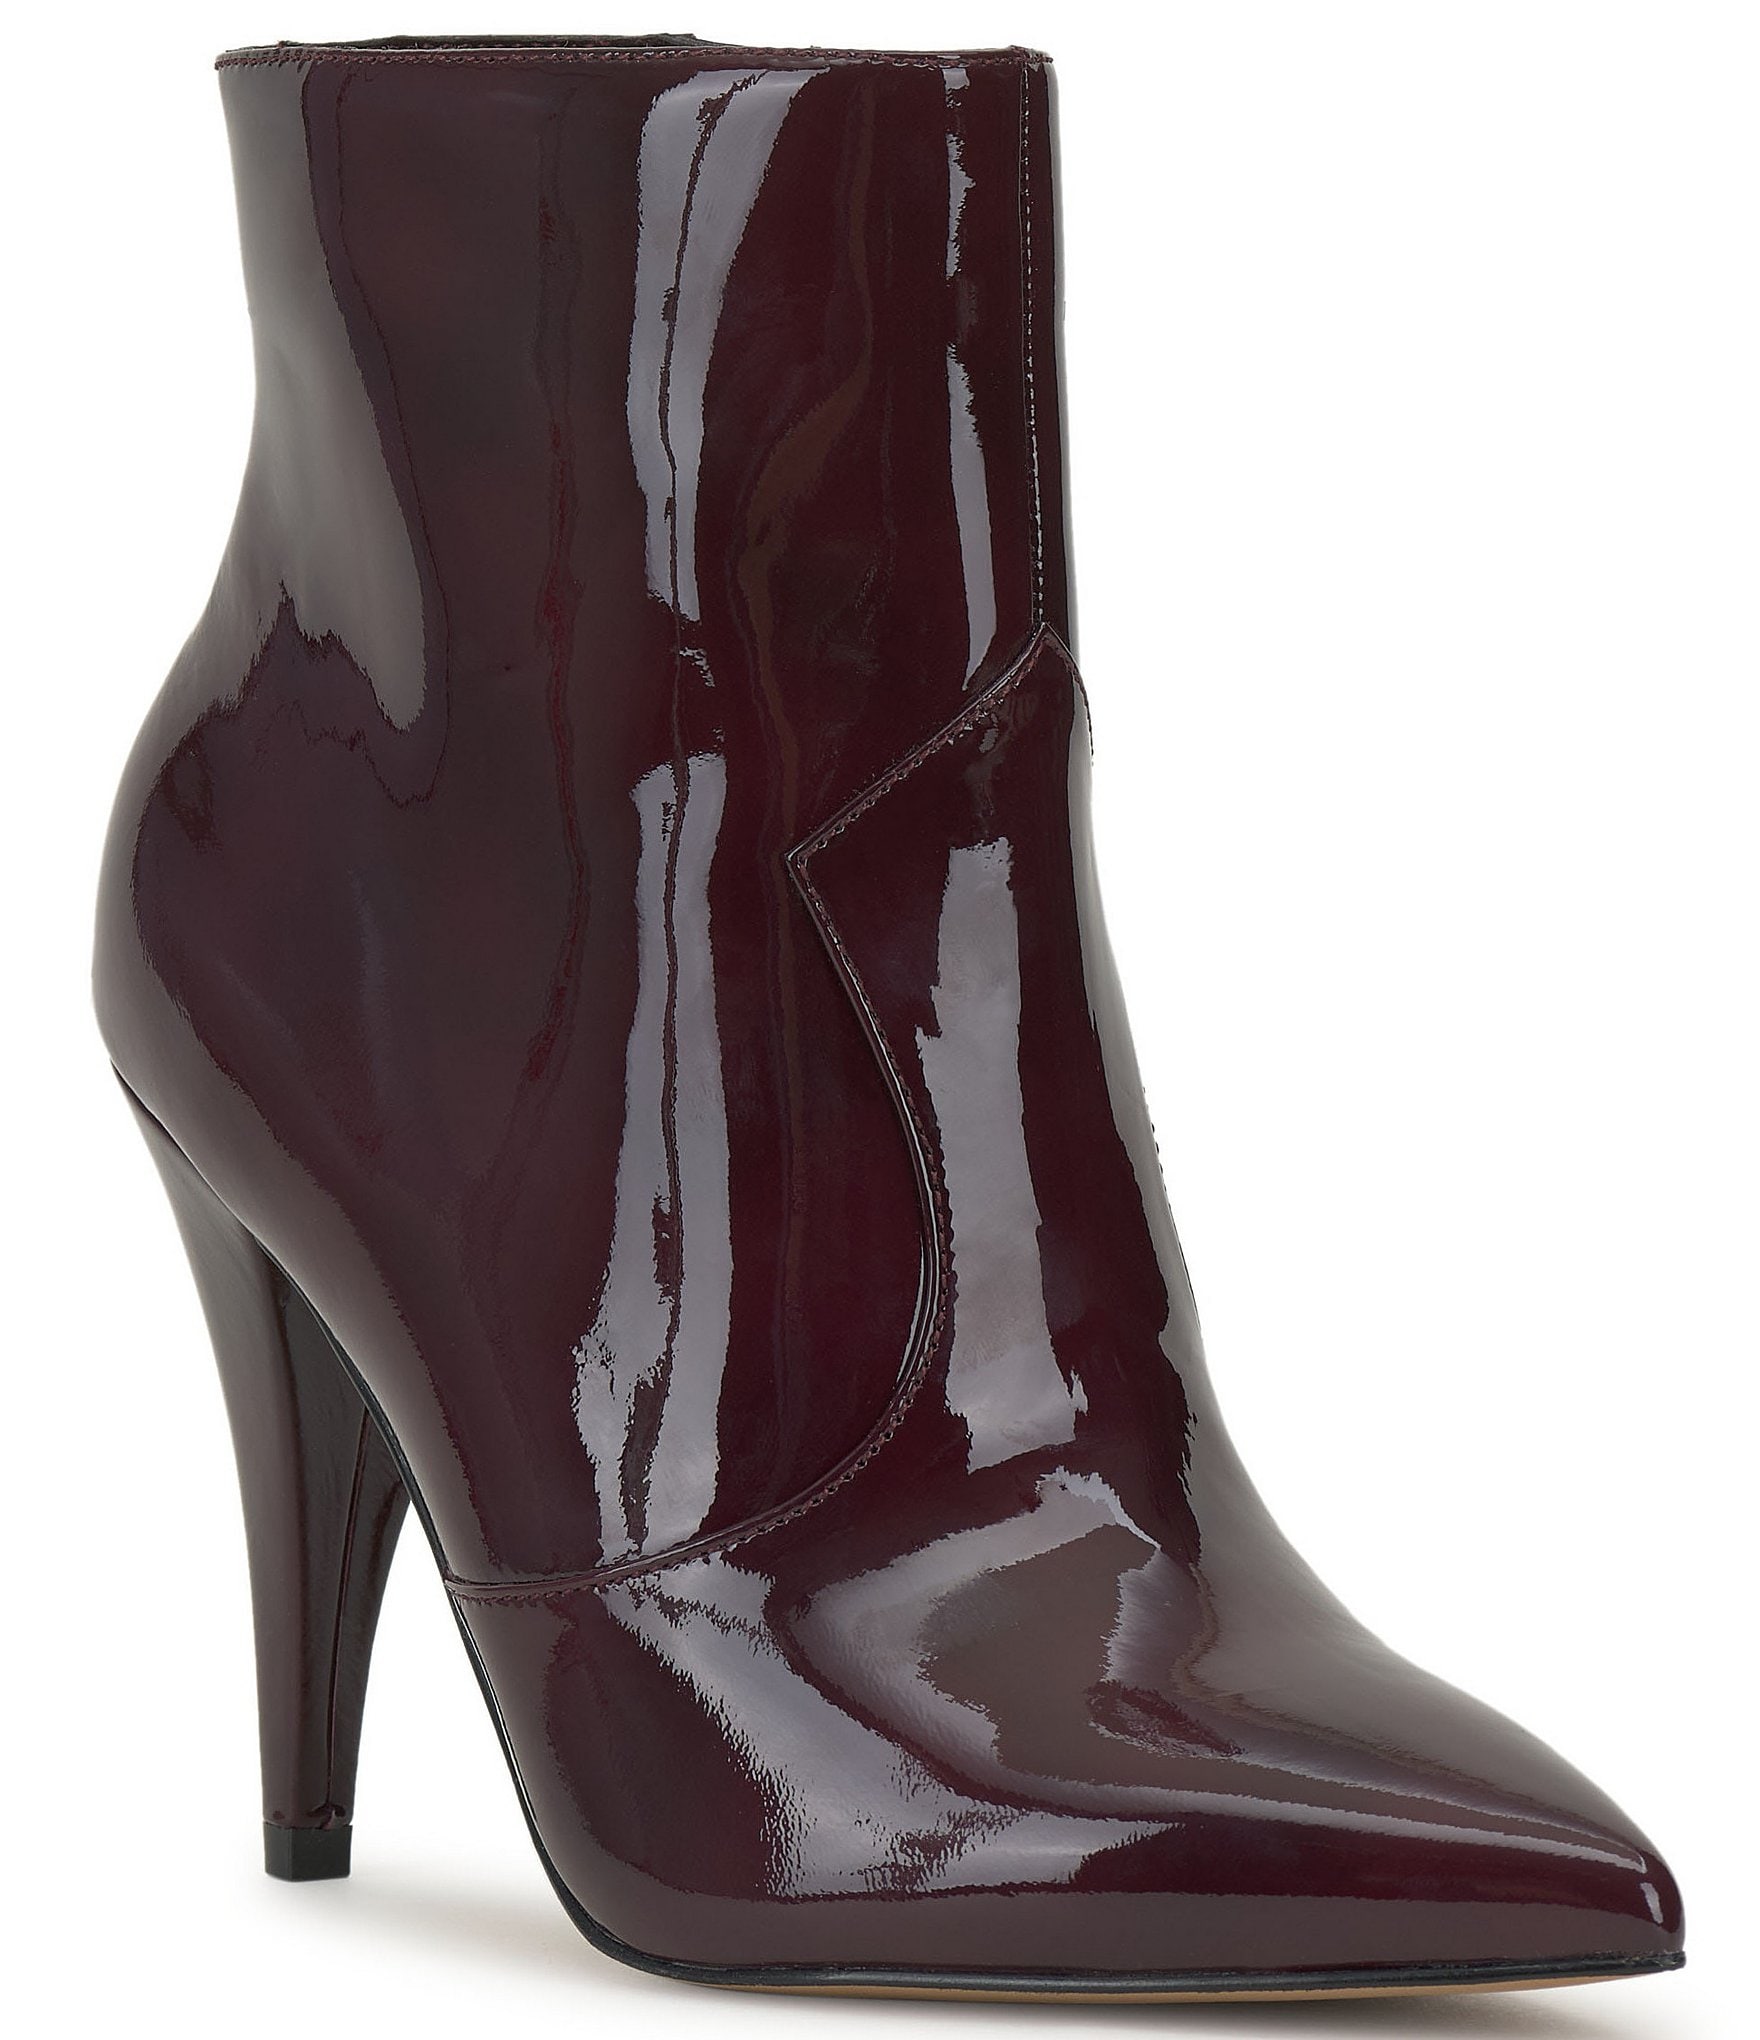 patent leather booties